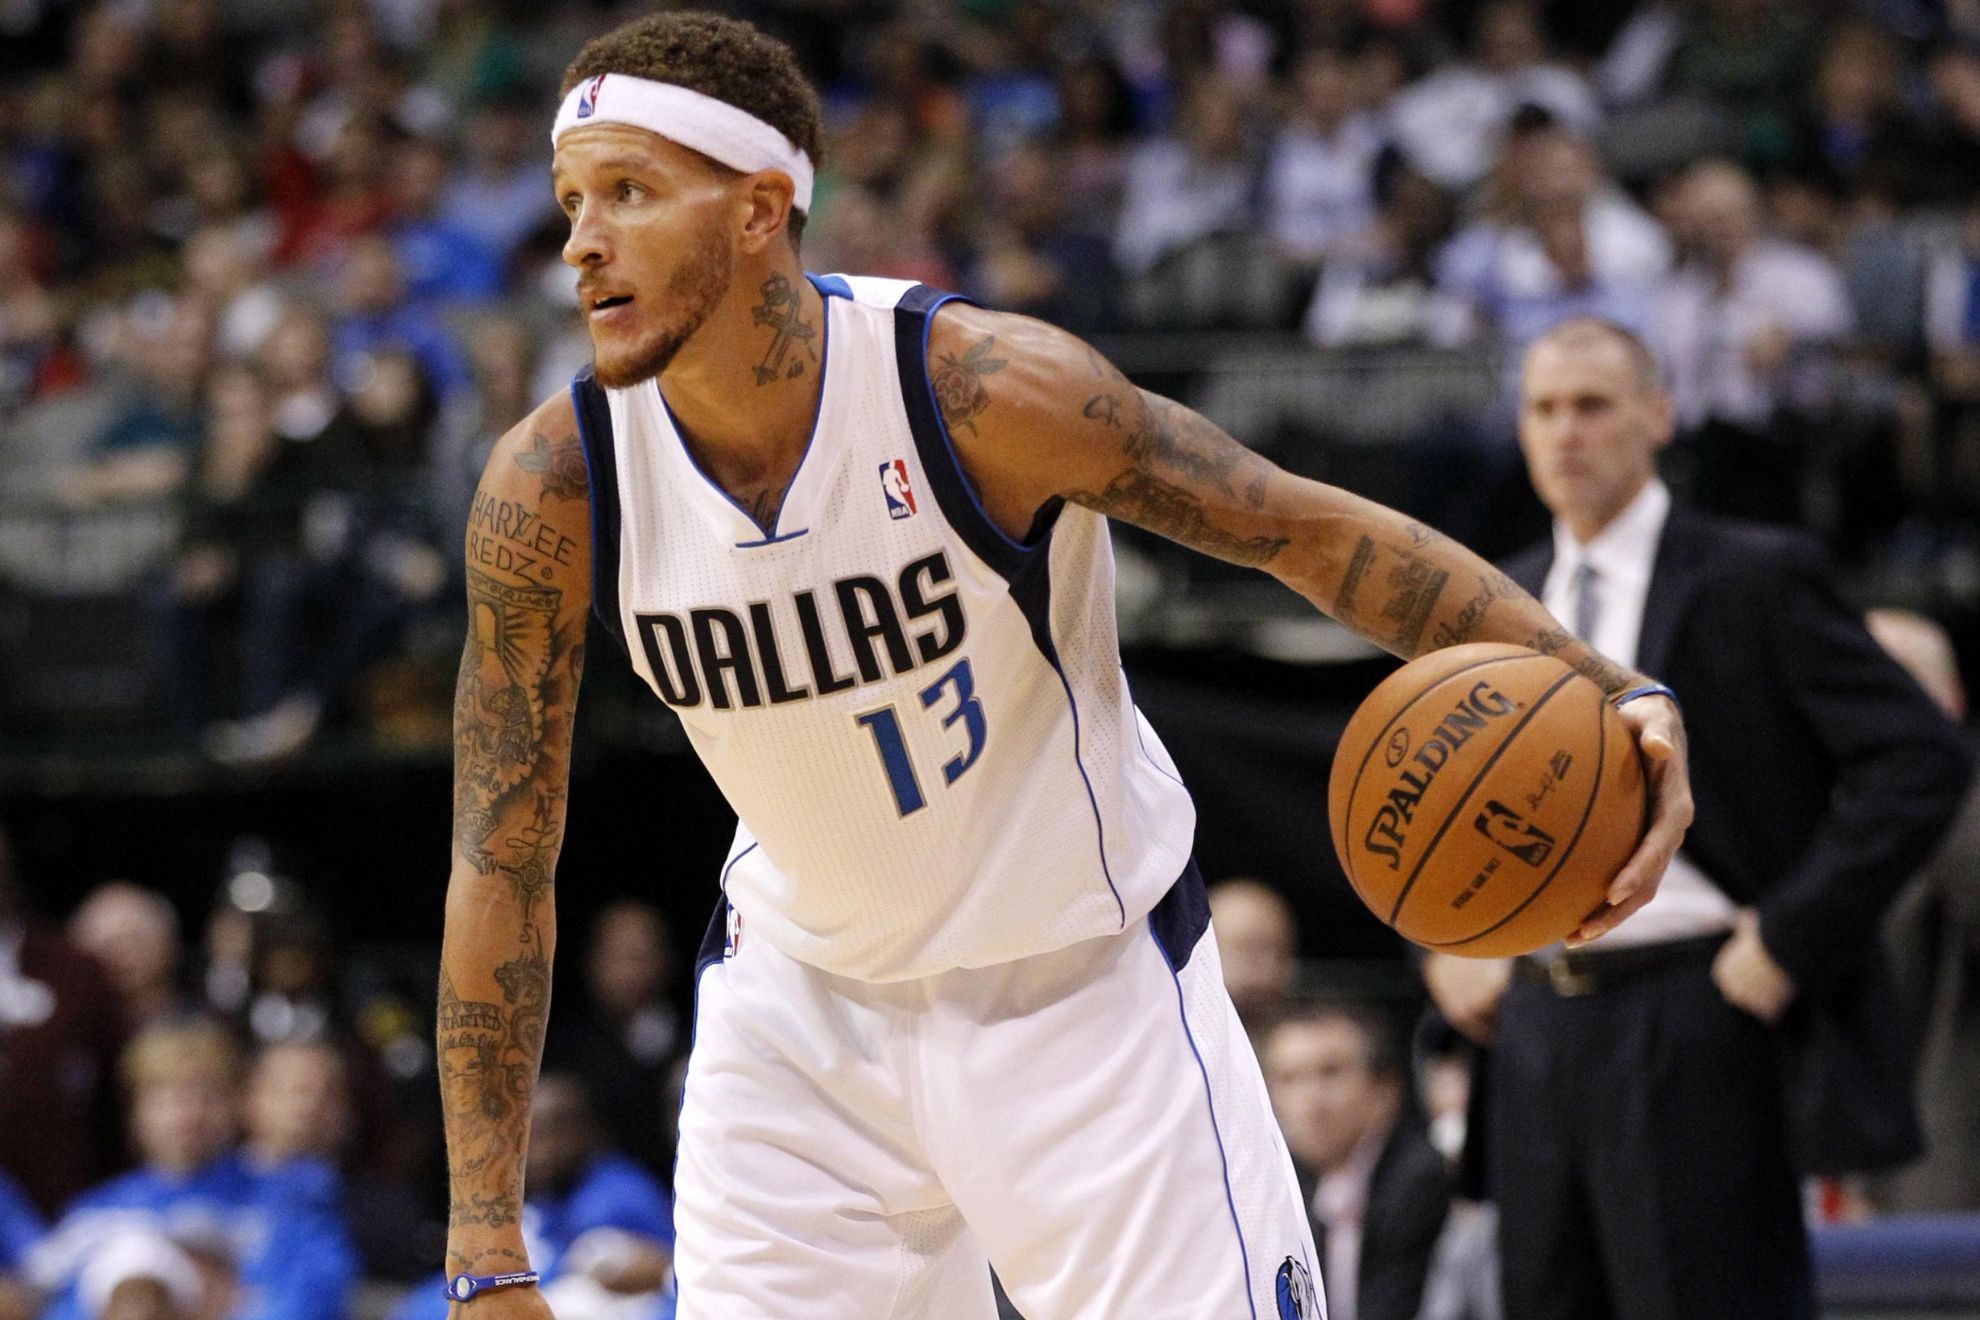 Former NBA player Delonte West is homeless and struggling, teammates tried to help him